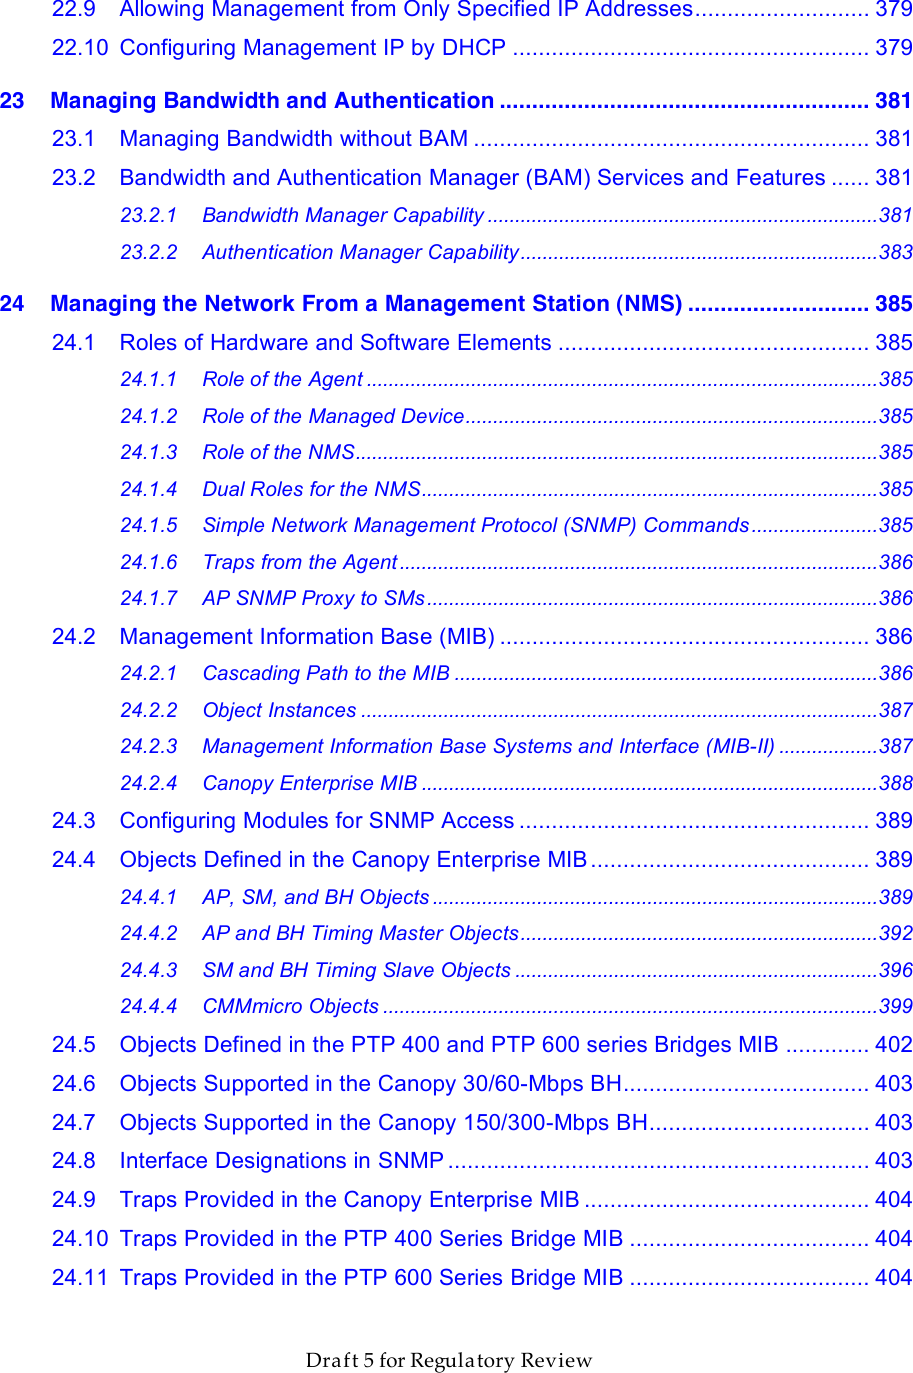                  March 200                  Through Software Release 6.       Draft 5 for Regulatory Review 22.9 Allowing Management from Only Specified IP Addresses........................... 379 22.10 Configuring Management IP by DHCP ....................................................... 379 23 Managing Bandwidth and Authentication ......................................................... 381 23.1 Managing Bandwidth without BAM ............................................................. 381 23.2 Bandwidth and Authentication Manager (BAM) Services and Features ...... 381 23.2.1 Bandwidth Manager Capability .......................................................................381 23.2.2 Authentication Manager Capability.................................................................383 24 Managing the Network From a Management Station (NMS) ............................ 385 24.1 Roles of Hardware and Software Elements ................................................ 385 24.1.1 Role of the Agent .............................................................................................385 24.1.2 Role of the Managed Device...........................................................................385 24.1.3 Role of the NMS...............................................................................................385 24.1.4 Dual Roles for the NMS...................................................................................385 24.1.5 Simple Network Management Protocol (SNMP) Commands .......................385 24.1.6 Traps from the Agent.......................................................................................386 24.1.7 AP SNMP Proxy to SMs ..................................................................................386 24.2 Management Information Base (MIB) ......................................................... 386 24.2.1 Cascading Path to the MIB .............................................................................386 24.2.2 Object Instances ..............................................................................................387 24.2.3 Management Information Base Systems and Interface (MIB-II) ..................387 24.2.4 Canopy Enterprise MIB ...................................................................................388 24.3 Configuring Modules for SNMP Access ...................................................... 389 24.4 Objects Defined in the Canopy Enterprise MIB........................................... 389 24.4.1 AP, SM, and BH Objects .................................................................................389 24.4.2 AP and BH Timing Master Objects.................................................................392 24.4.3 SM and BH Timing Slave Objects ..................................................................396 24.4.4 CMMmicro Objects ..........................................................................................399 24.5 Objects Defined in the PTP 400 and PTP 600 series Bridges MIB ............. 402 24.6 Objects Supported in the Canopy 30/60-Mbps BH...................................... 403 24.7 Objects Supported in the Canopy 150/300-Mbps BH.................................. 403 24.8 Interface Designations in SNMP ................................................................. 403 24.9 Traps Provided in the Canopy Enterprise MIB ............................................ 404 24.10 Traps Provided in the PTP 400 Series Bridge MIB ..................................... 404 24.11 Traps Provided in the PTP 600 Series Bridge MIB ..................................... 404 